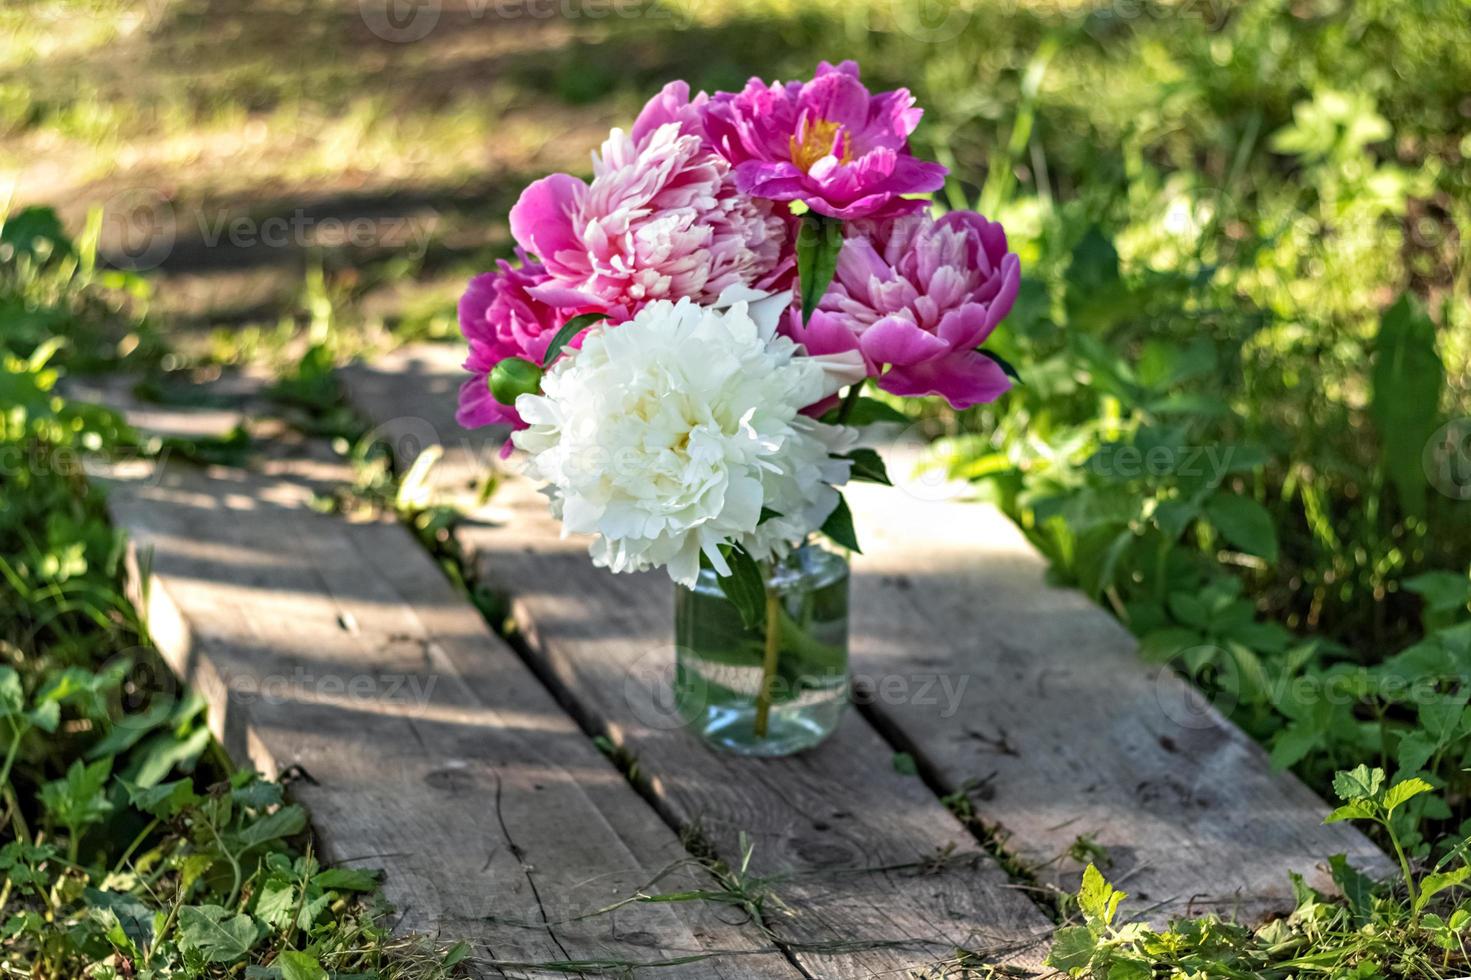 A bouquet of large white and pink peonies in a glass jar on a wooden bridge photo